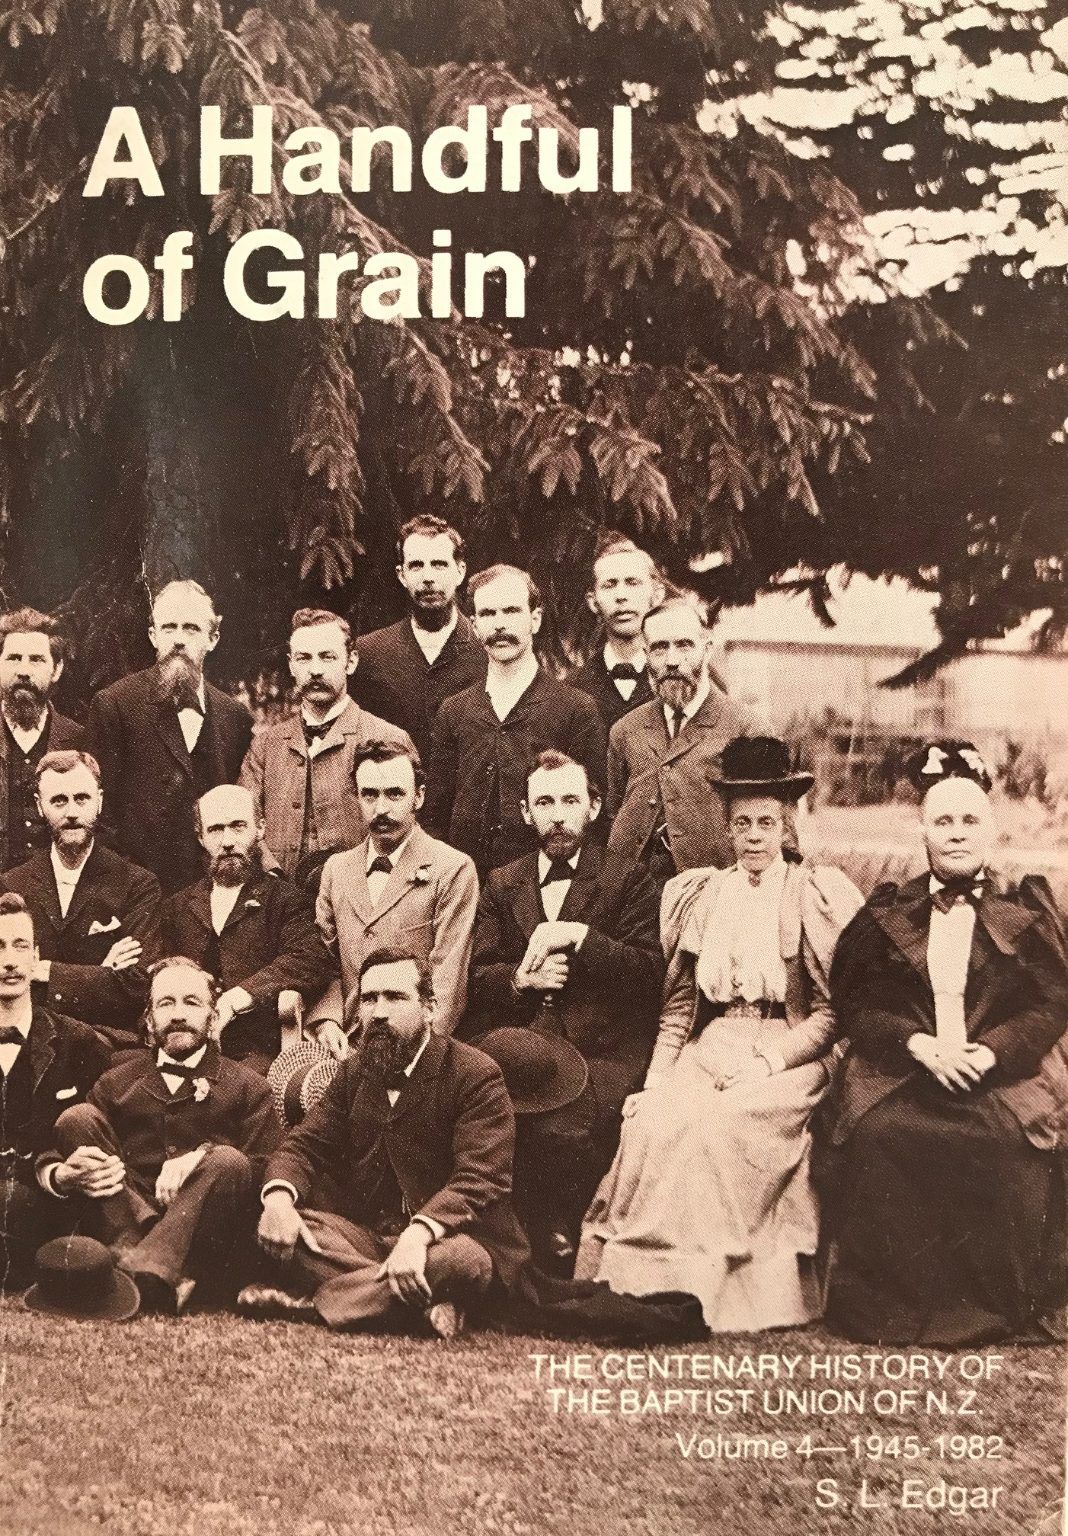 A HANDFUL OF GRAIN: The Centenary History of The Baptist Union of NZ 1945 - 1982